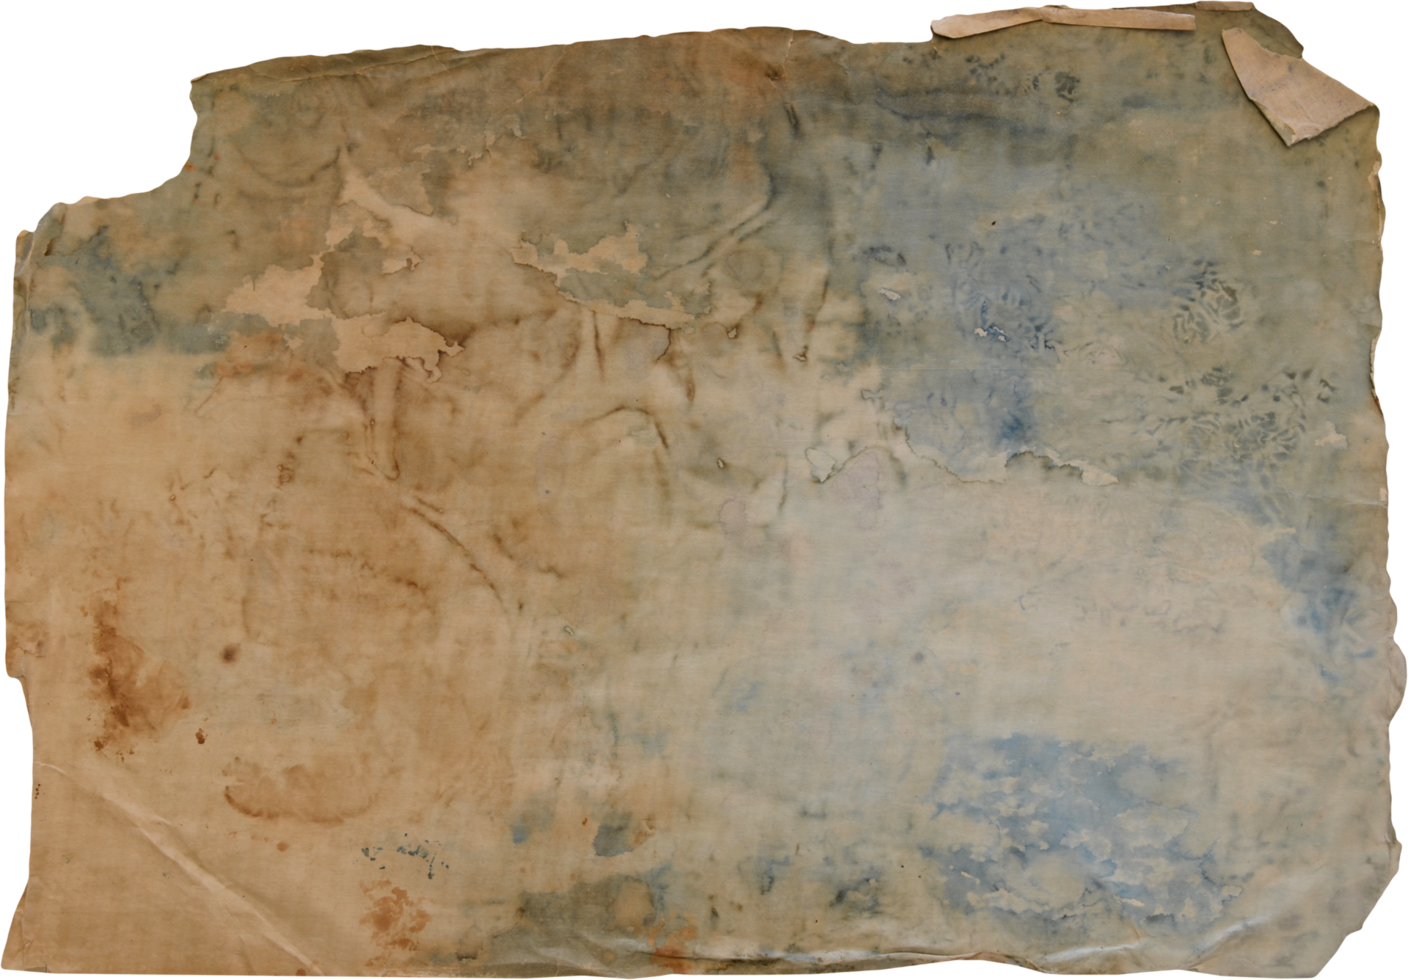 old paper texture png